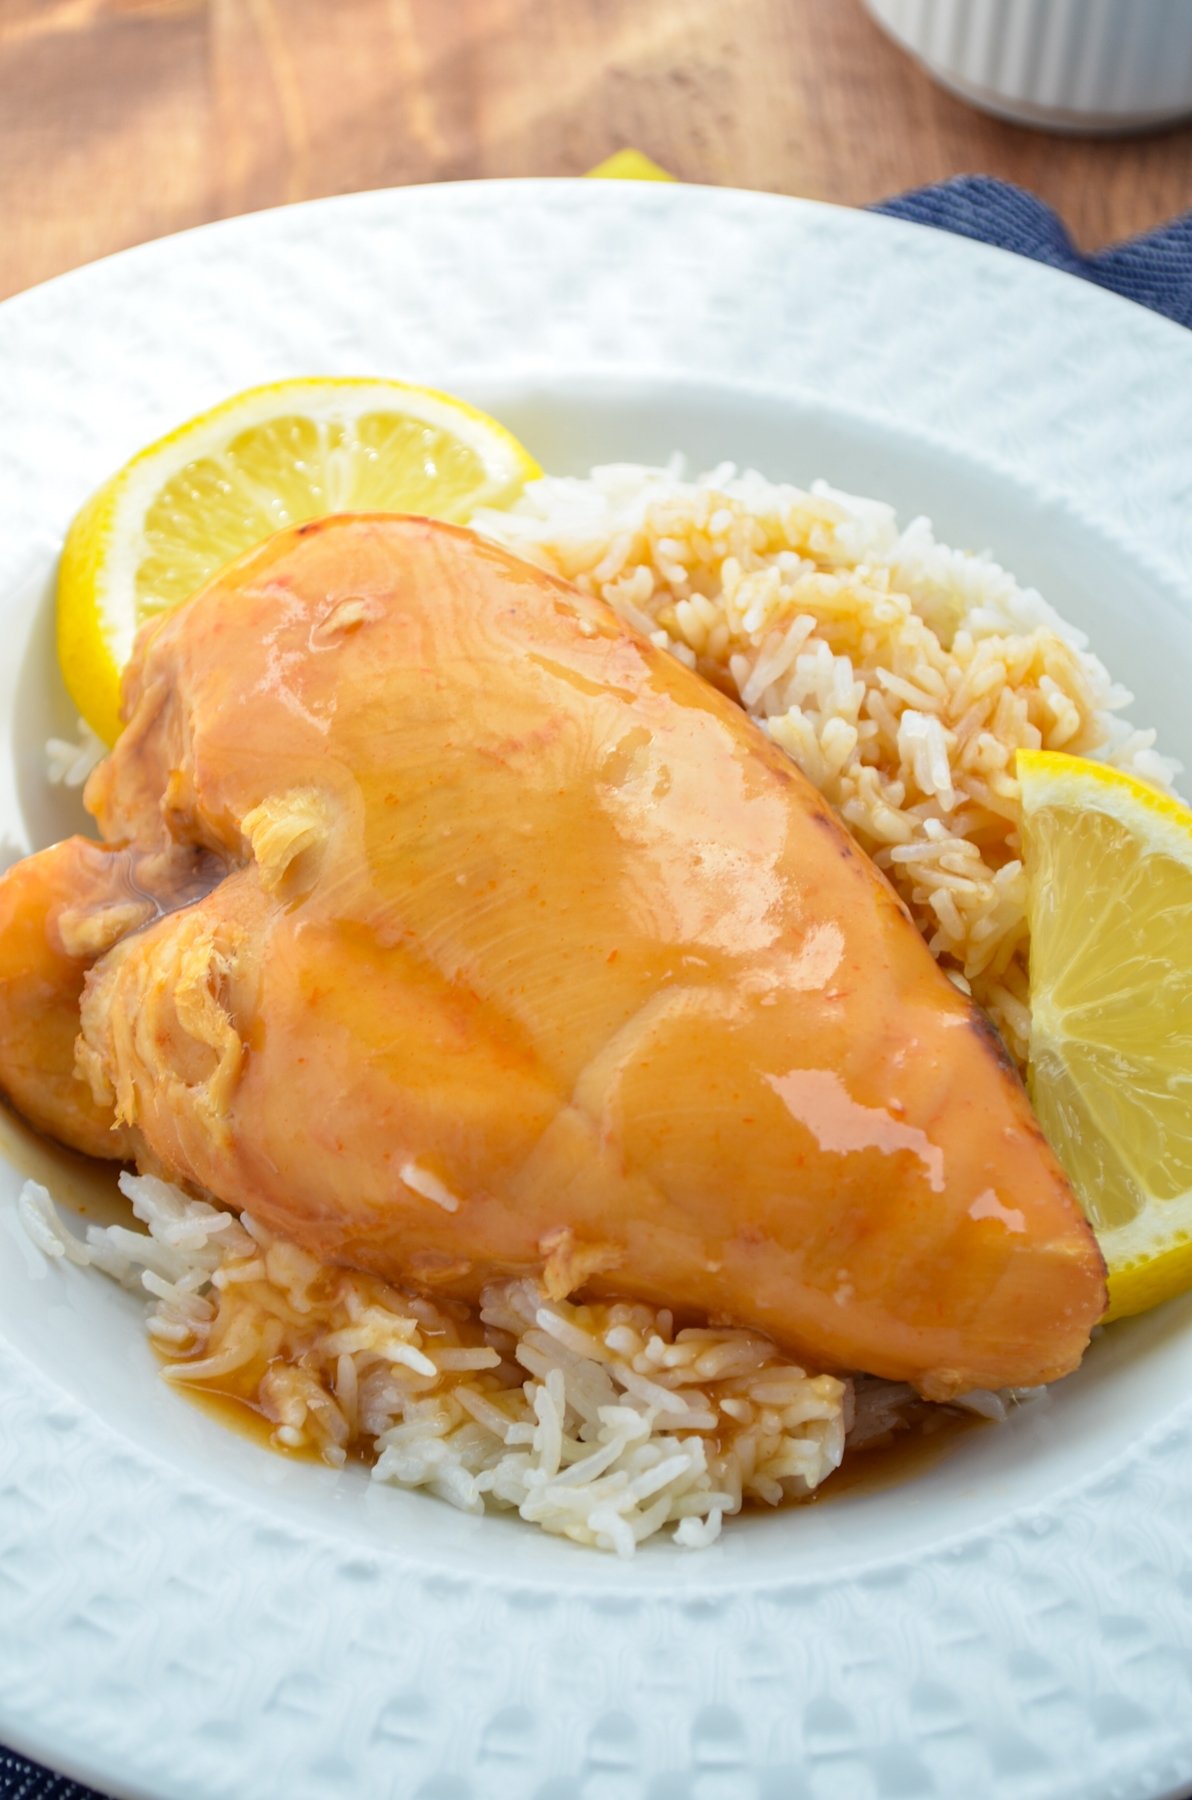 Slow cooker lemonade chicken, served on a bed of rice.